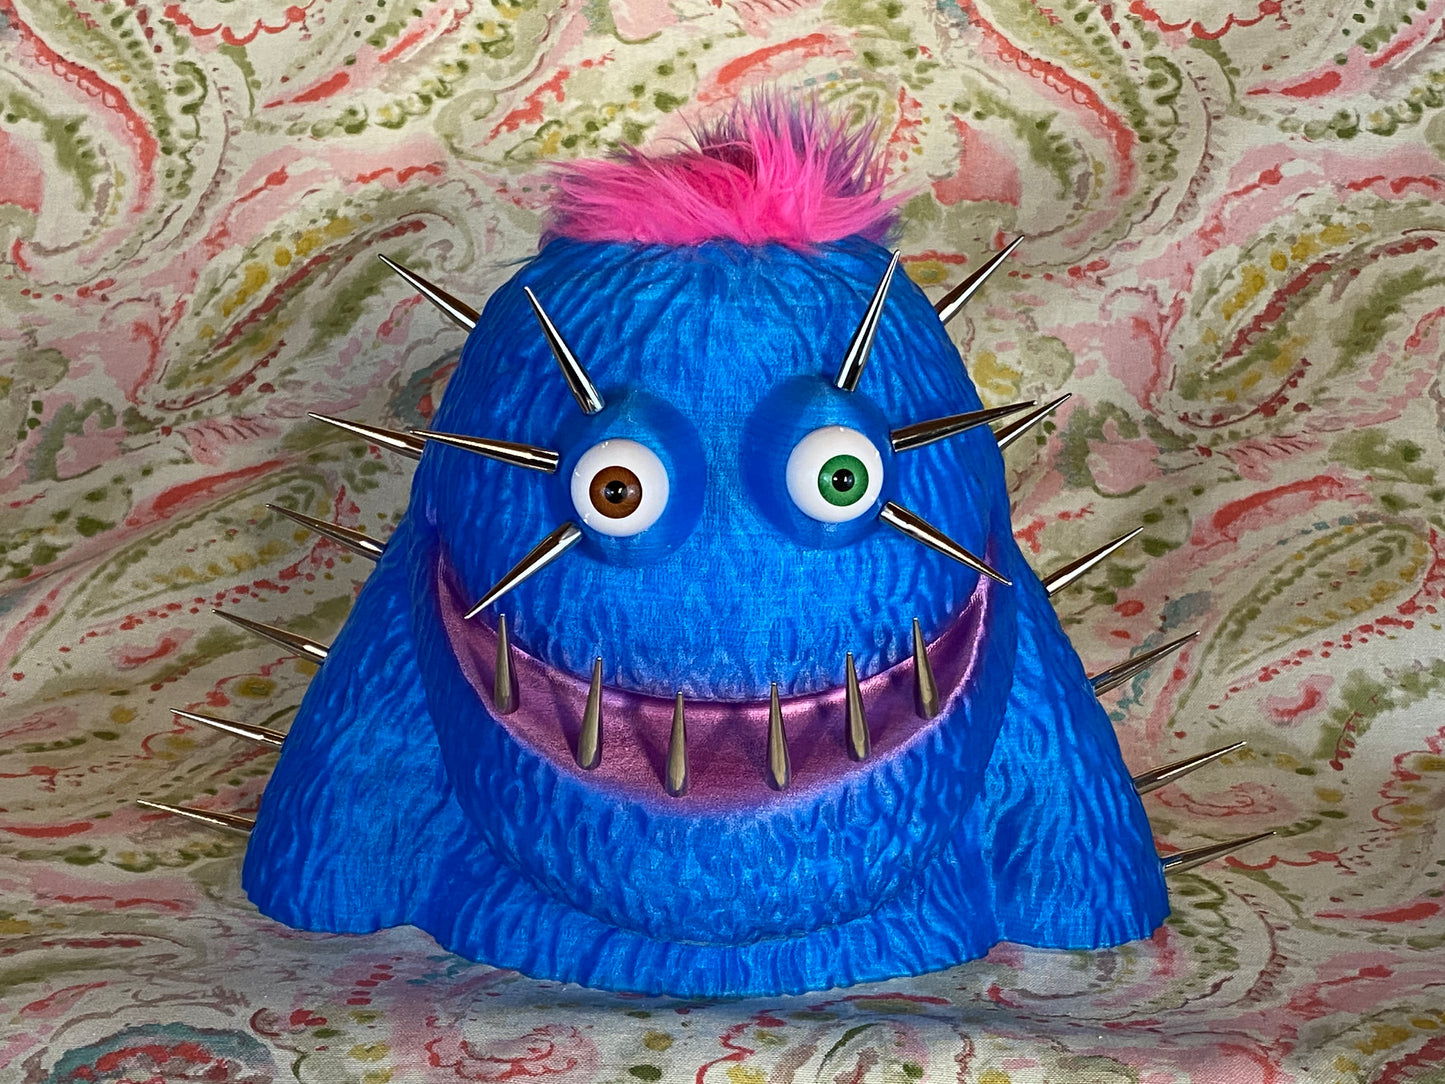 King Sized Monster Bust with Rainbow Hair